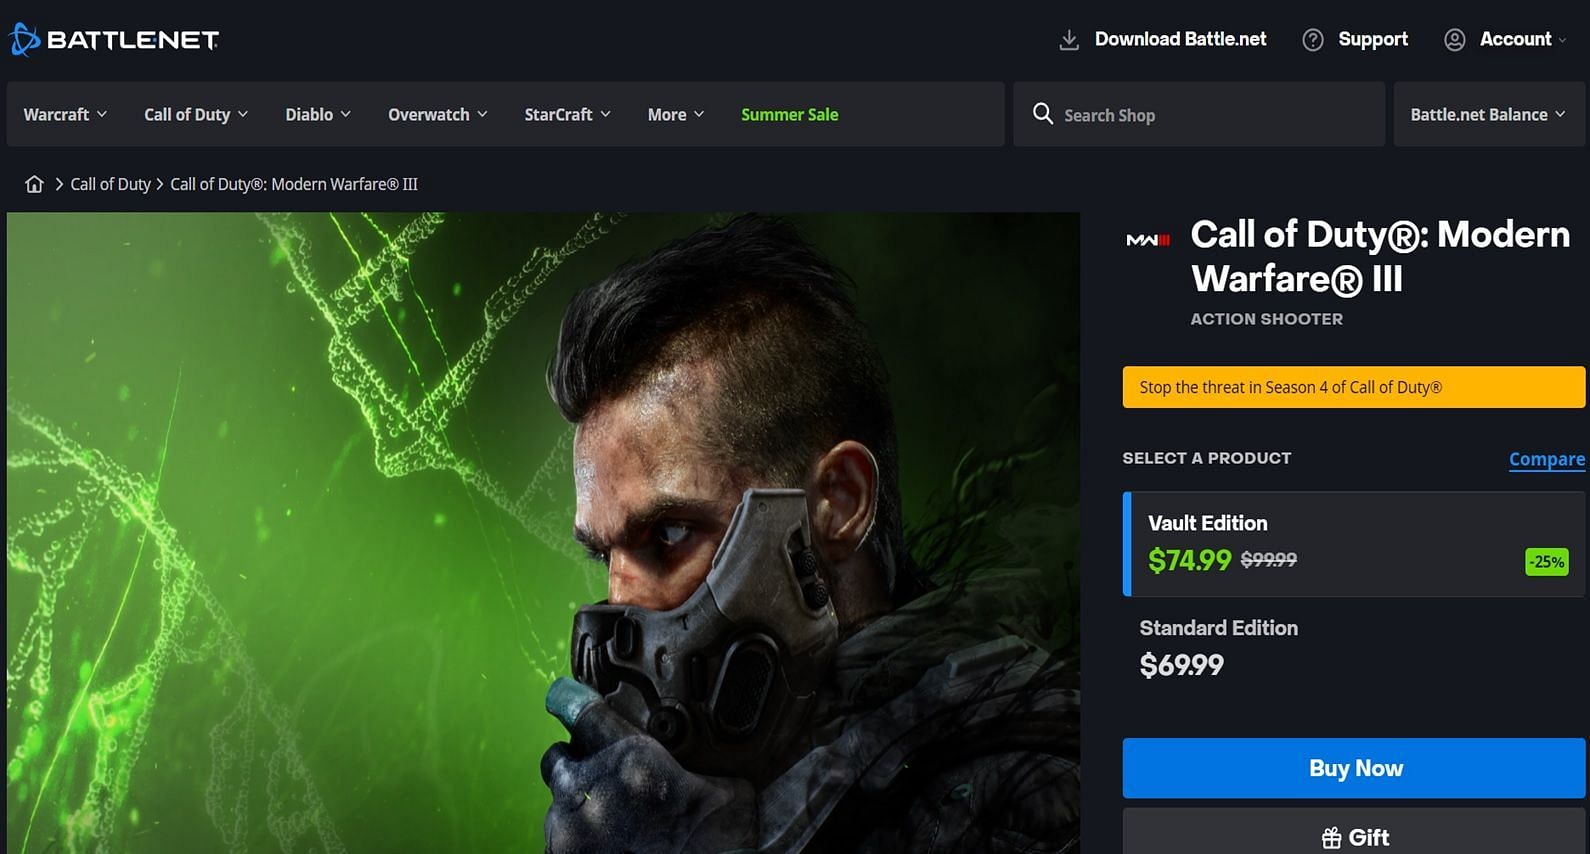 Players can purchase Modern Warfare 3&#039;s Vault Edition from Battle.net in the ongoing sale (Image via Activision/Battle.net)